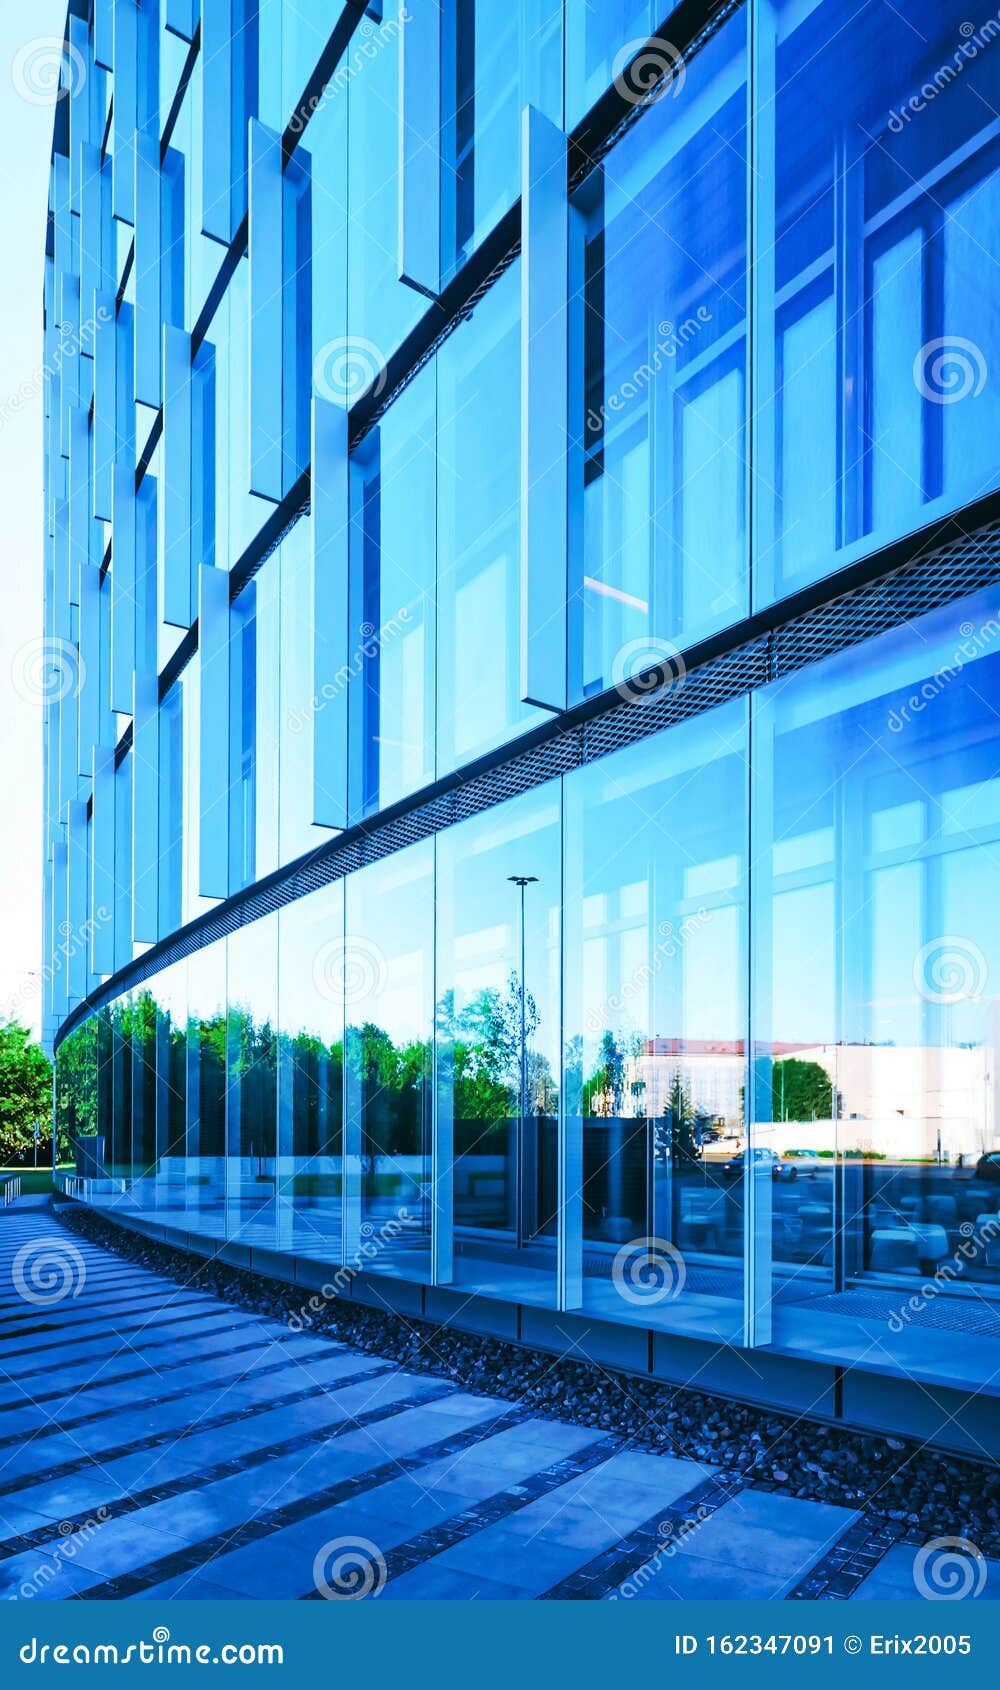 Glass Business Office Building Architecture In Modern City Stock Image Image Of Commercial Company 162347091,Layout 2 Bedroom Flat Design Plans